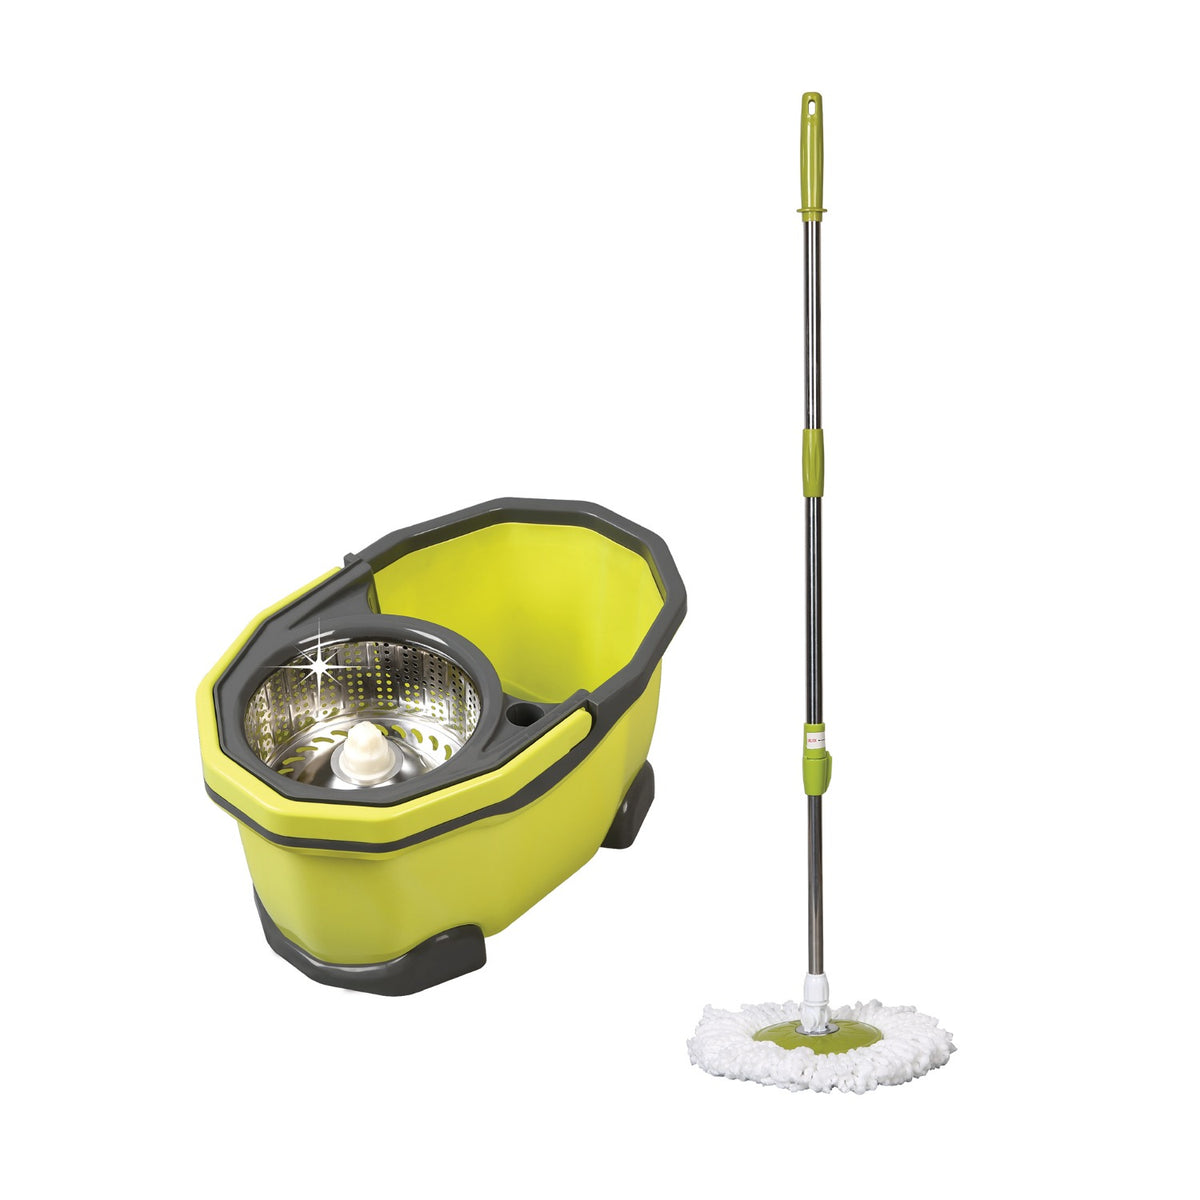 Cheap as Chips - The new deluxe spin mop! Get your hands